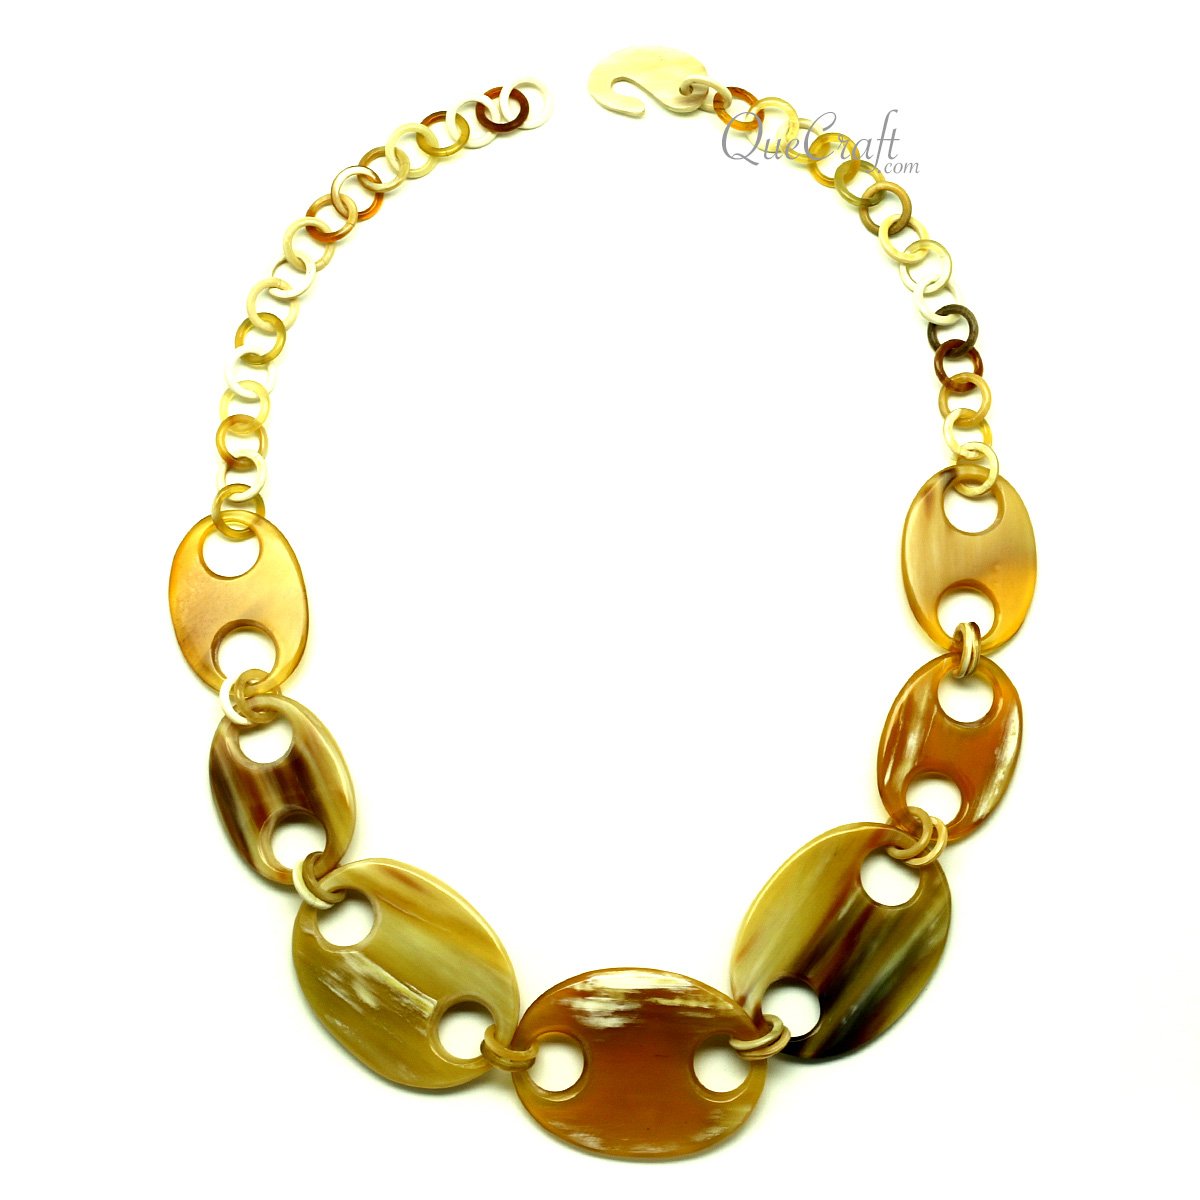 Horn Chain Necklace #13173 - HORN JEWELRY